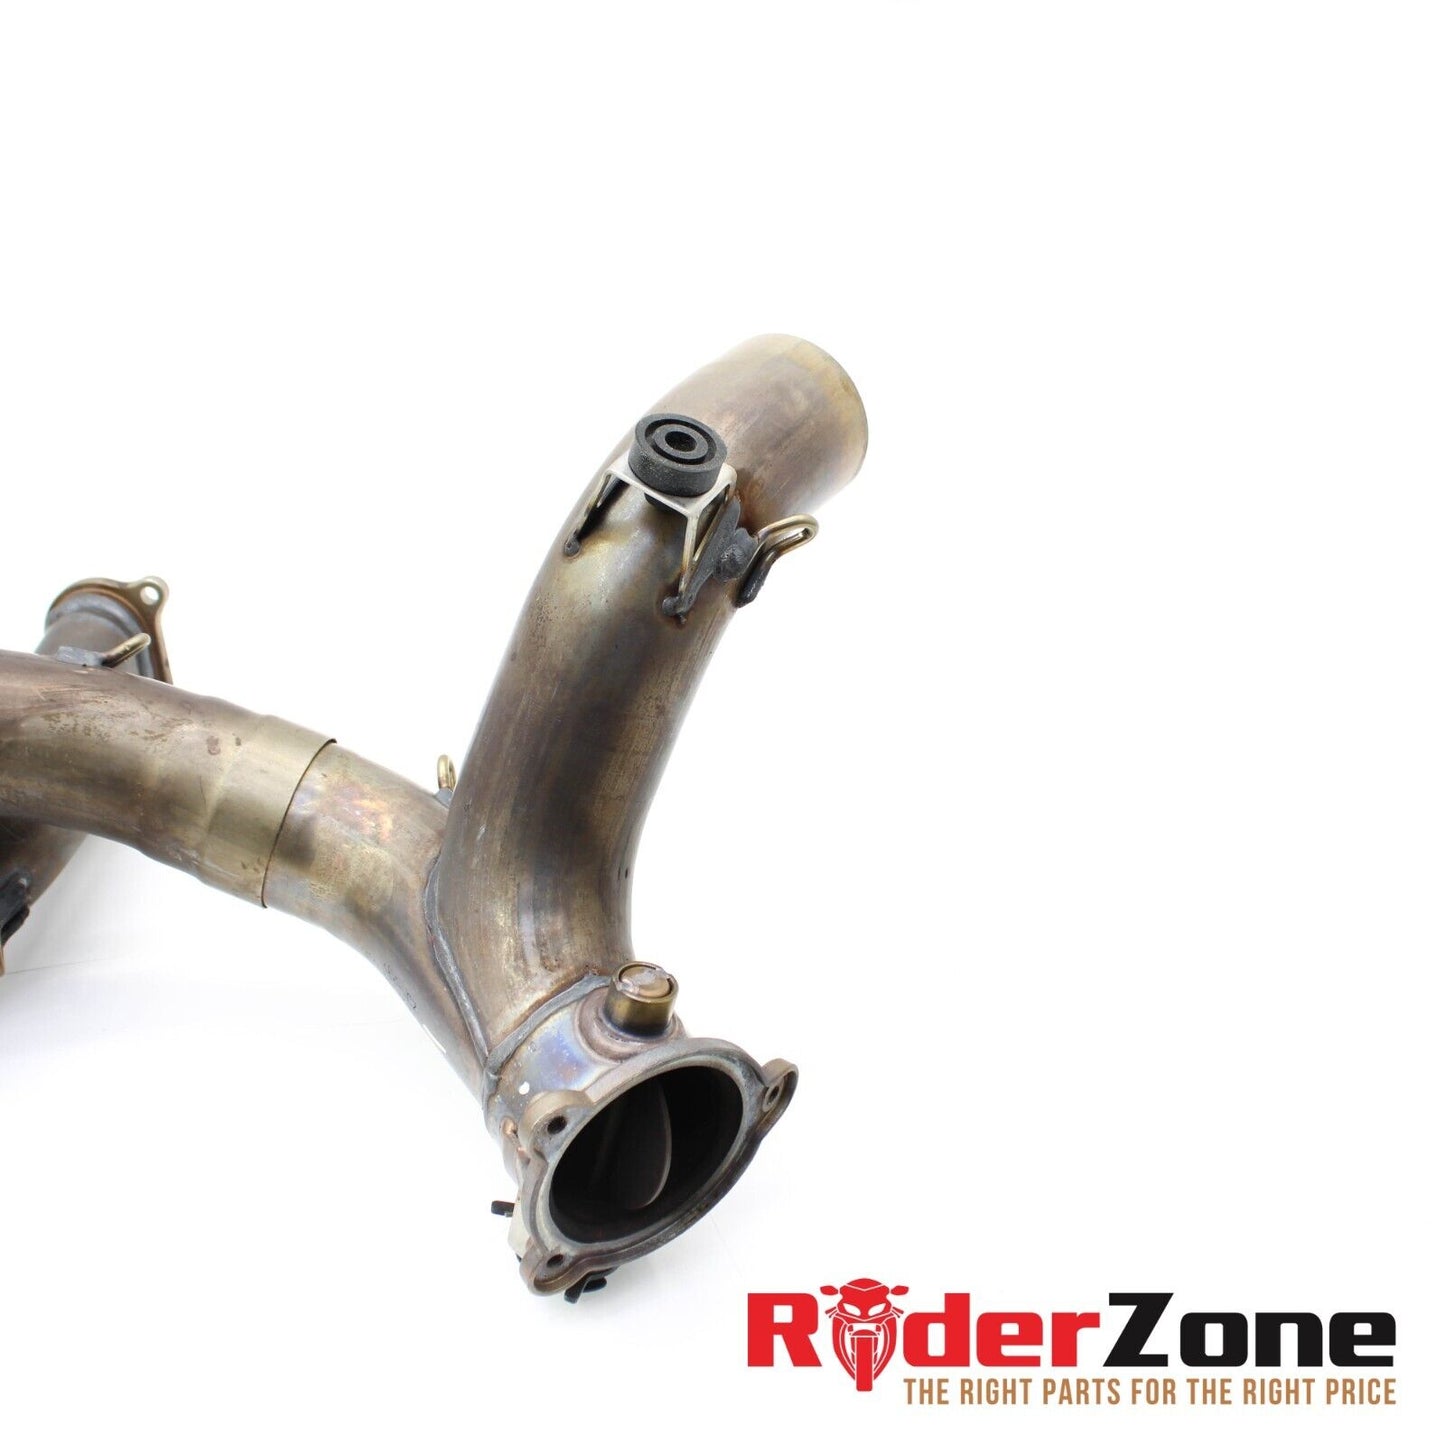 2012 - 2015 DUCATI PANIGALE 1199 EXHAUST FULL SYSTEM HEADERS PIPES COMPLETE OEM